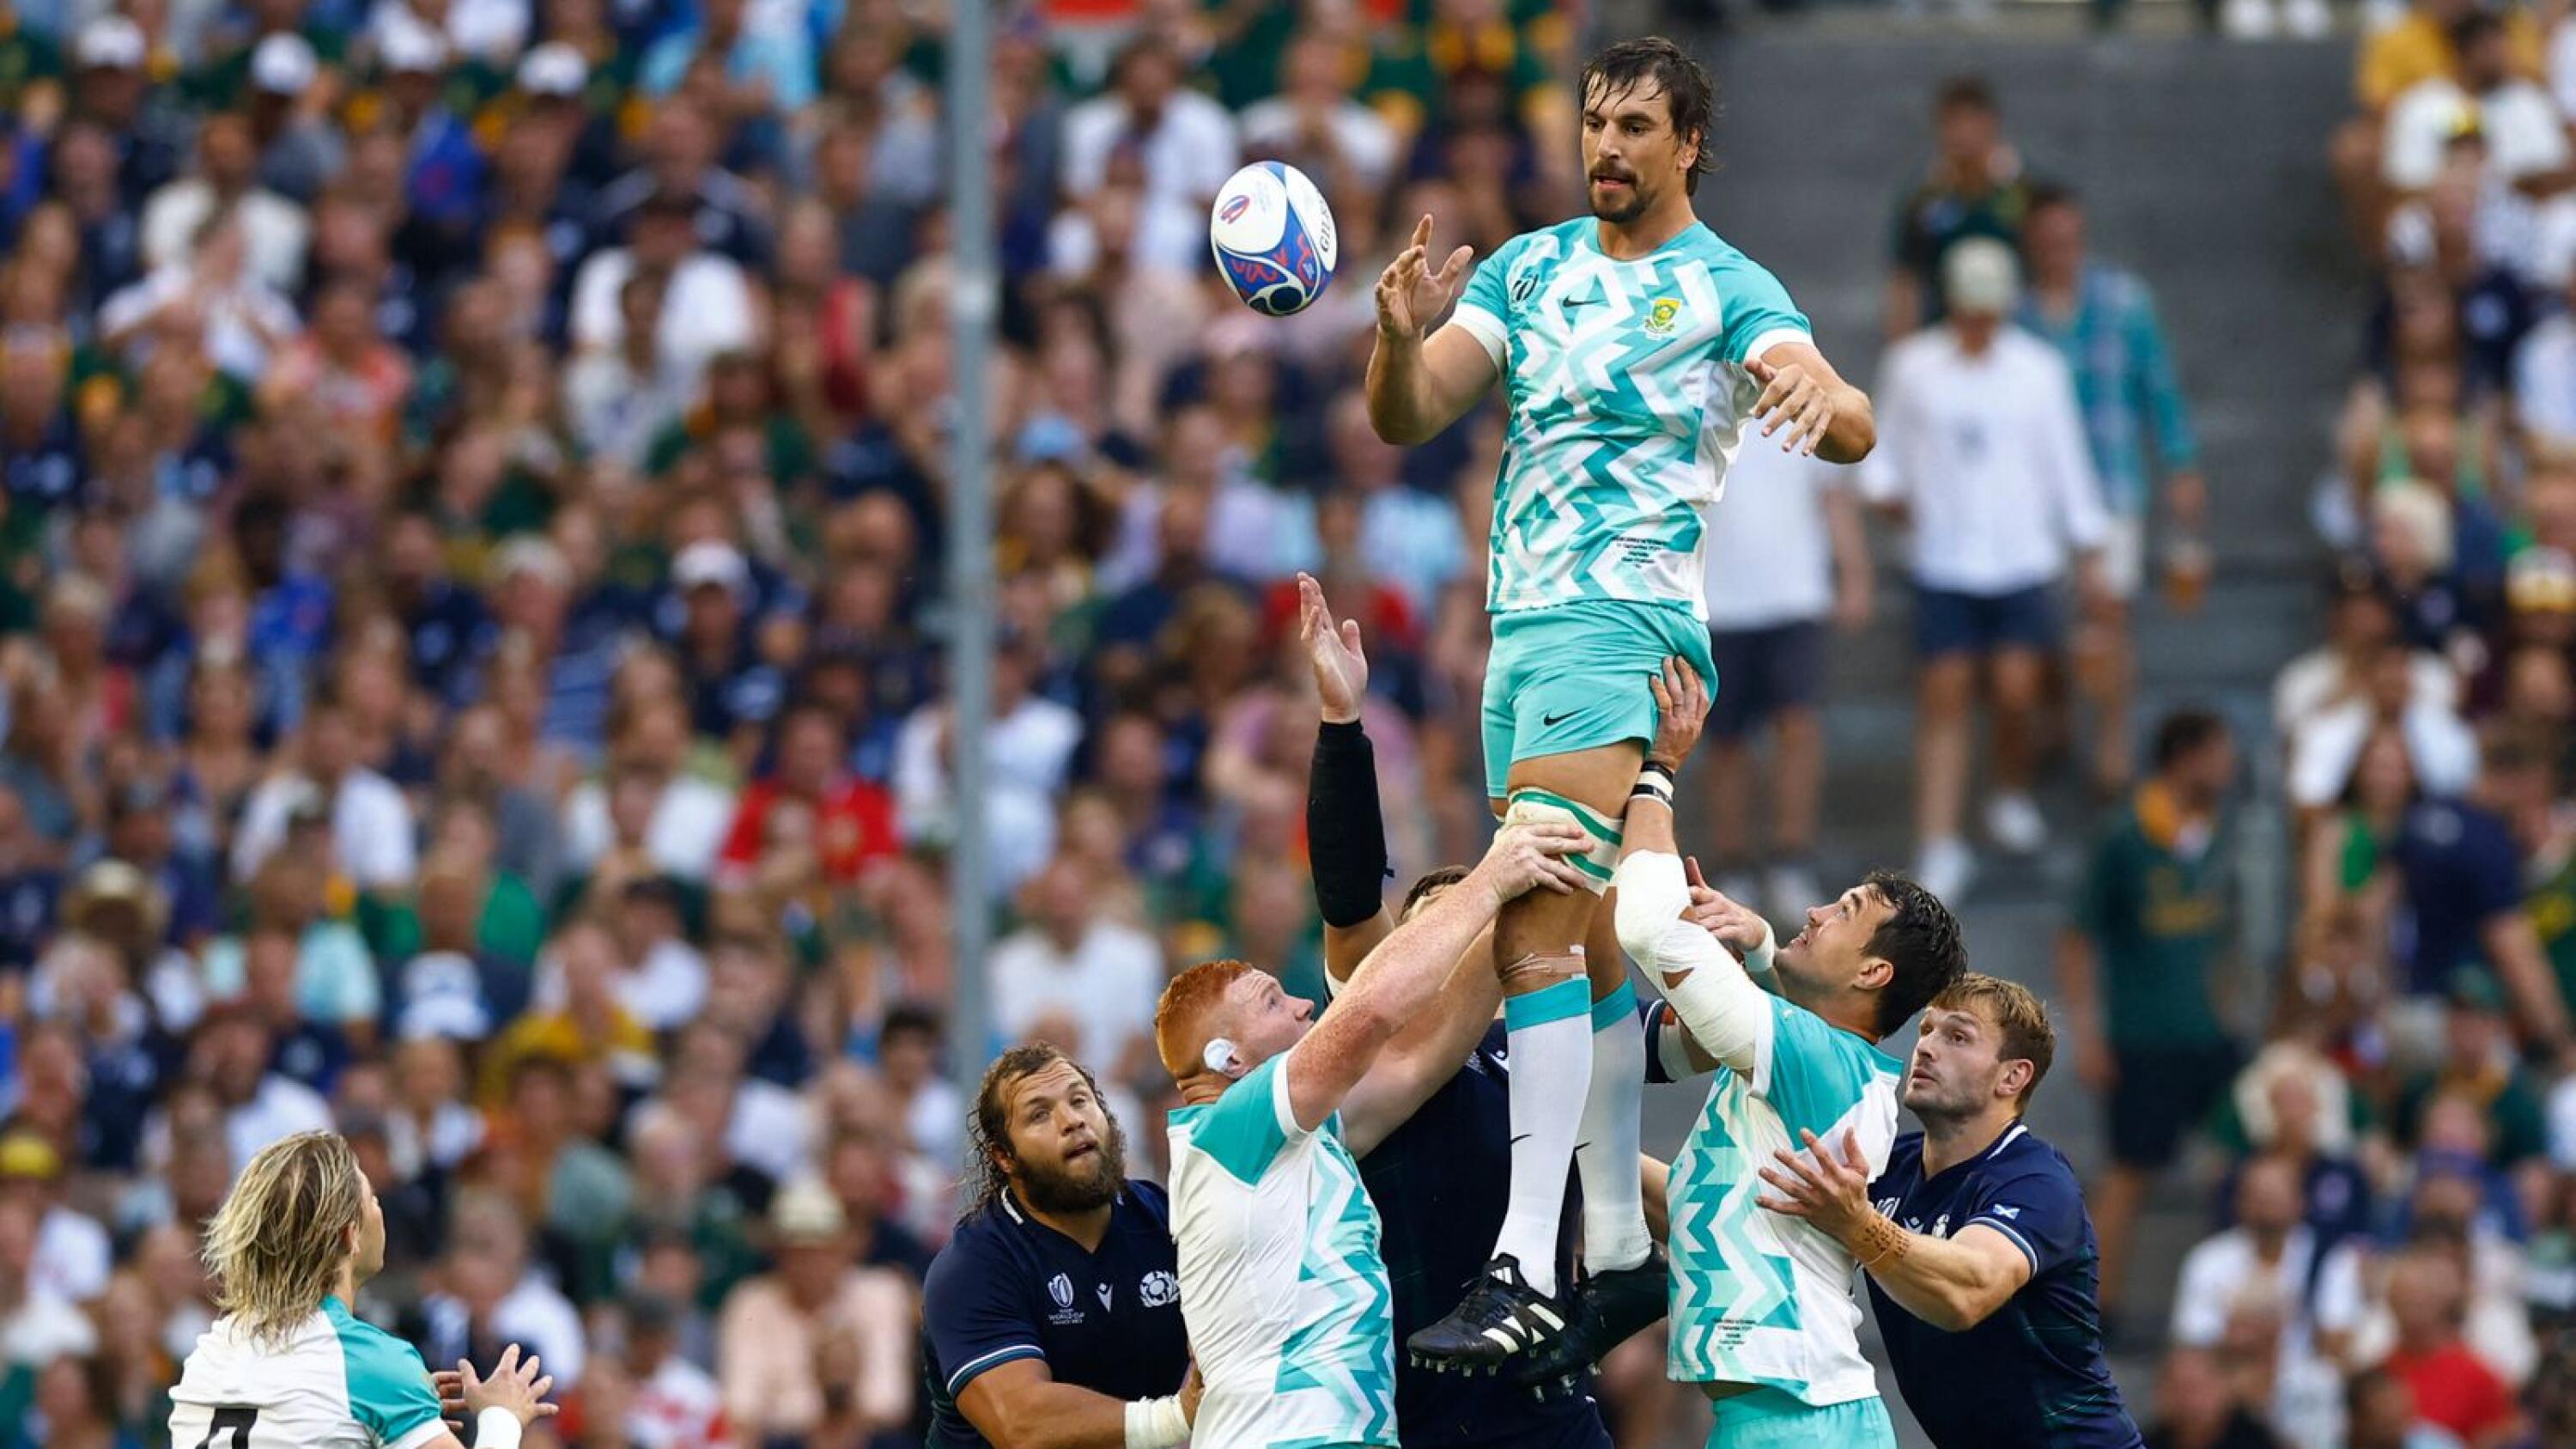 Eben Etzebeth gathers the ball during a line-out